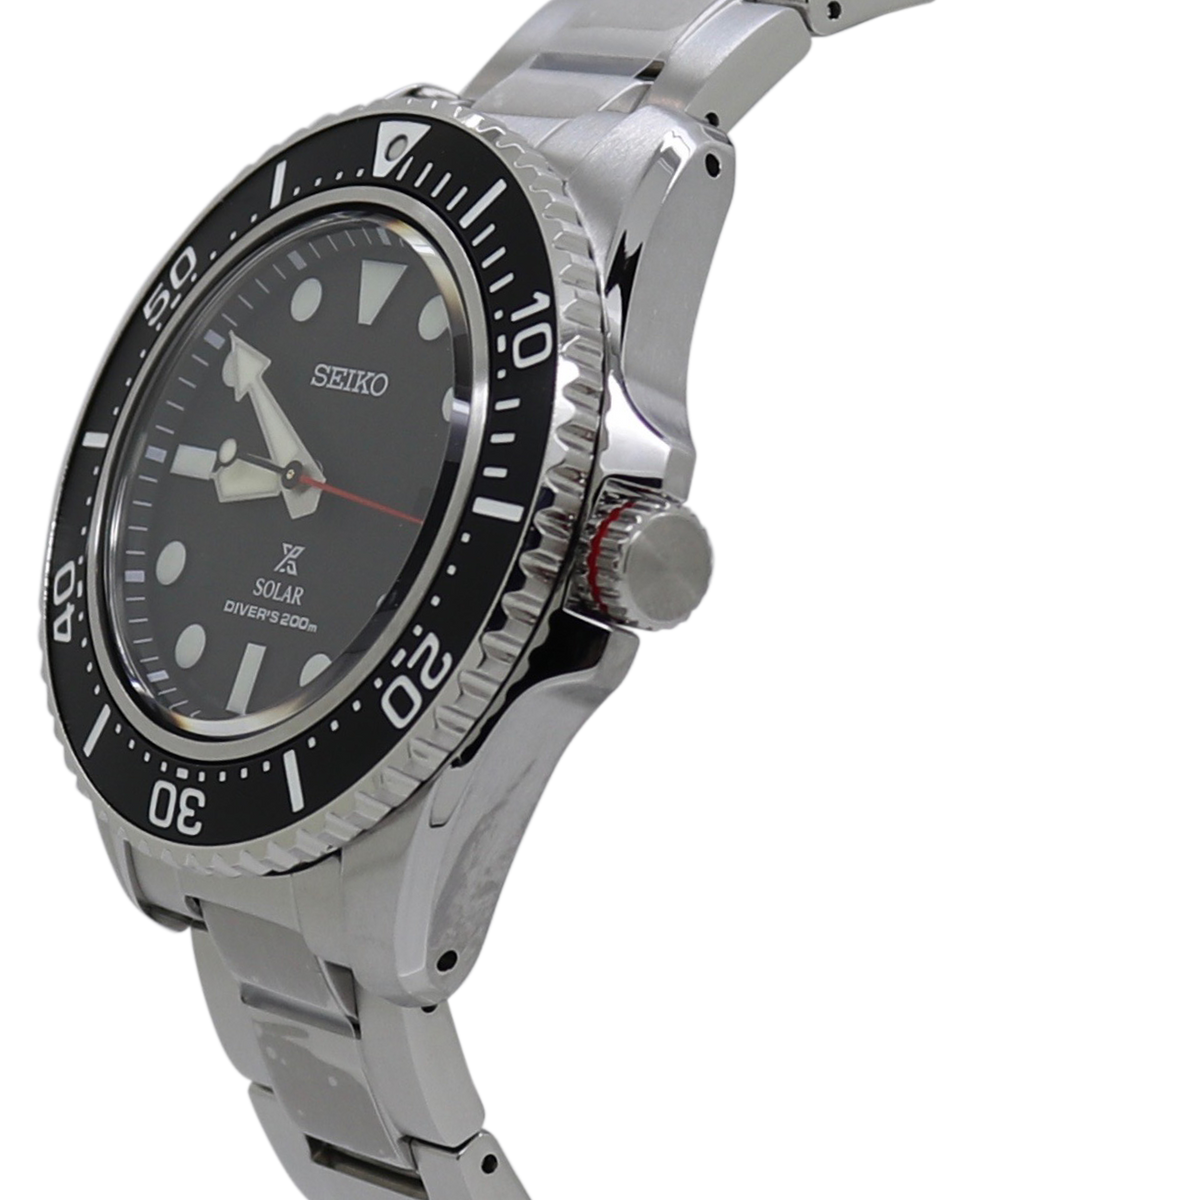 Seiko Prospex Solar Dive Watch with Sapphire Crystal and Black Dial #SNE589